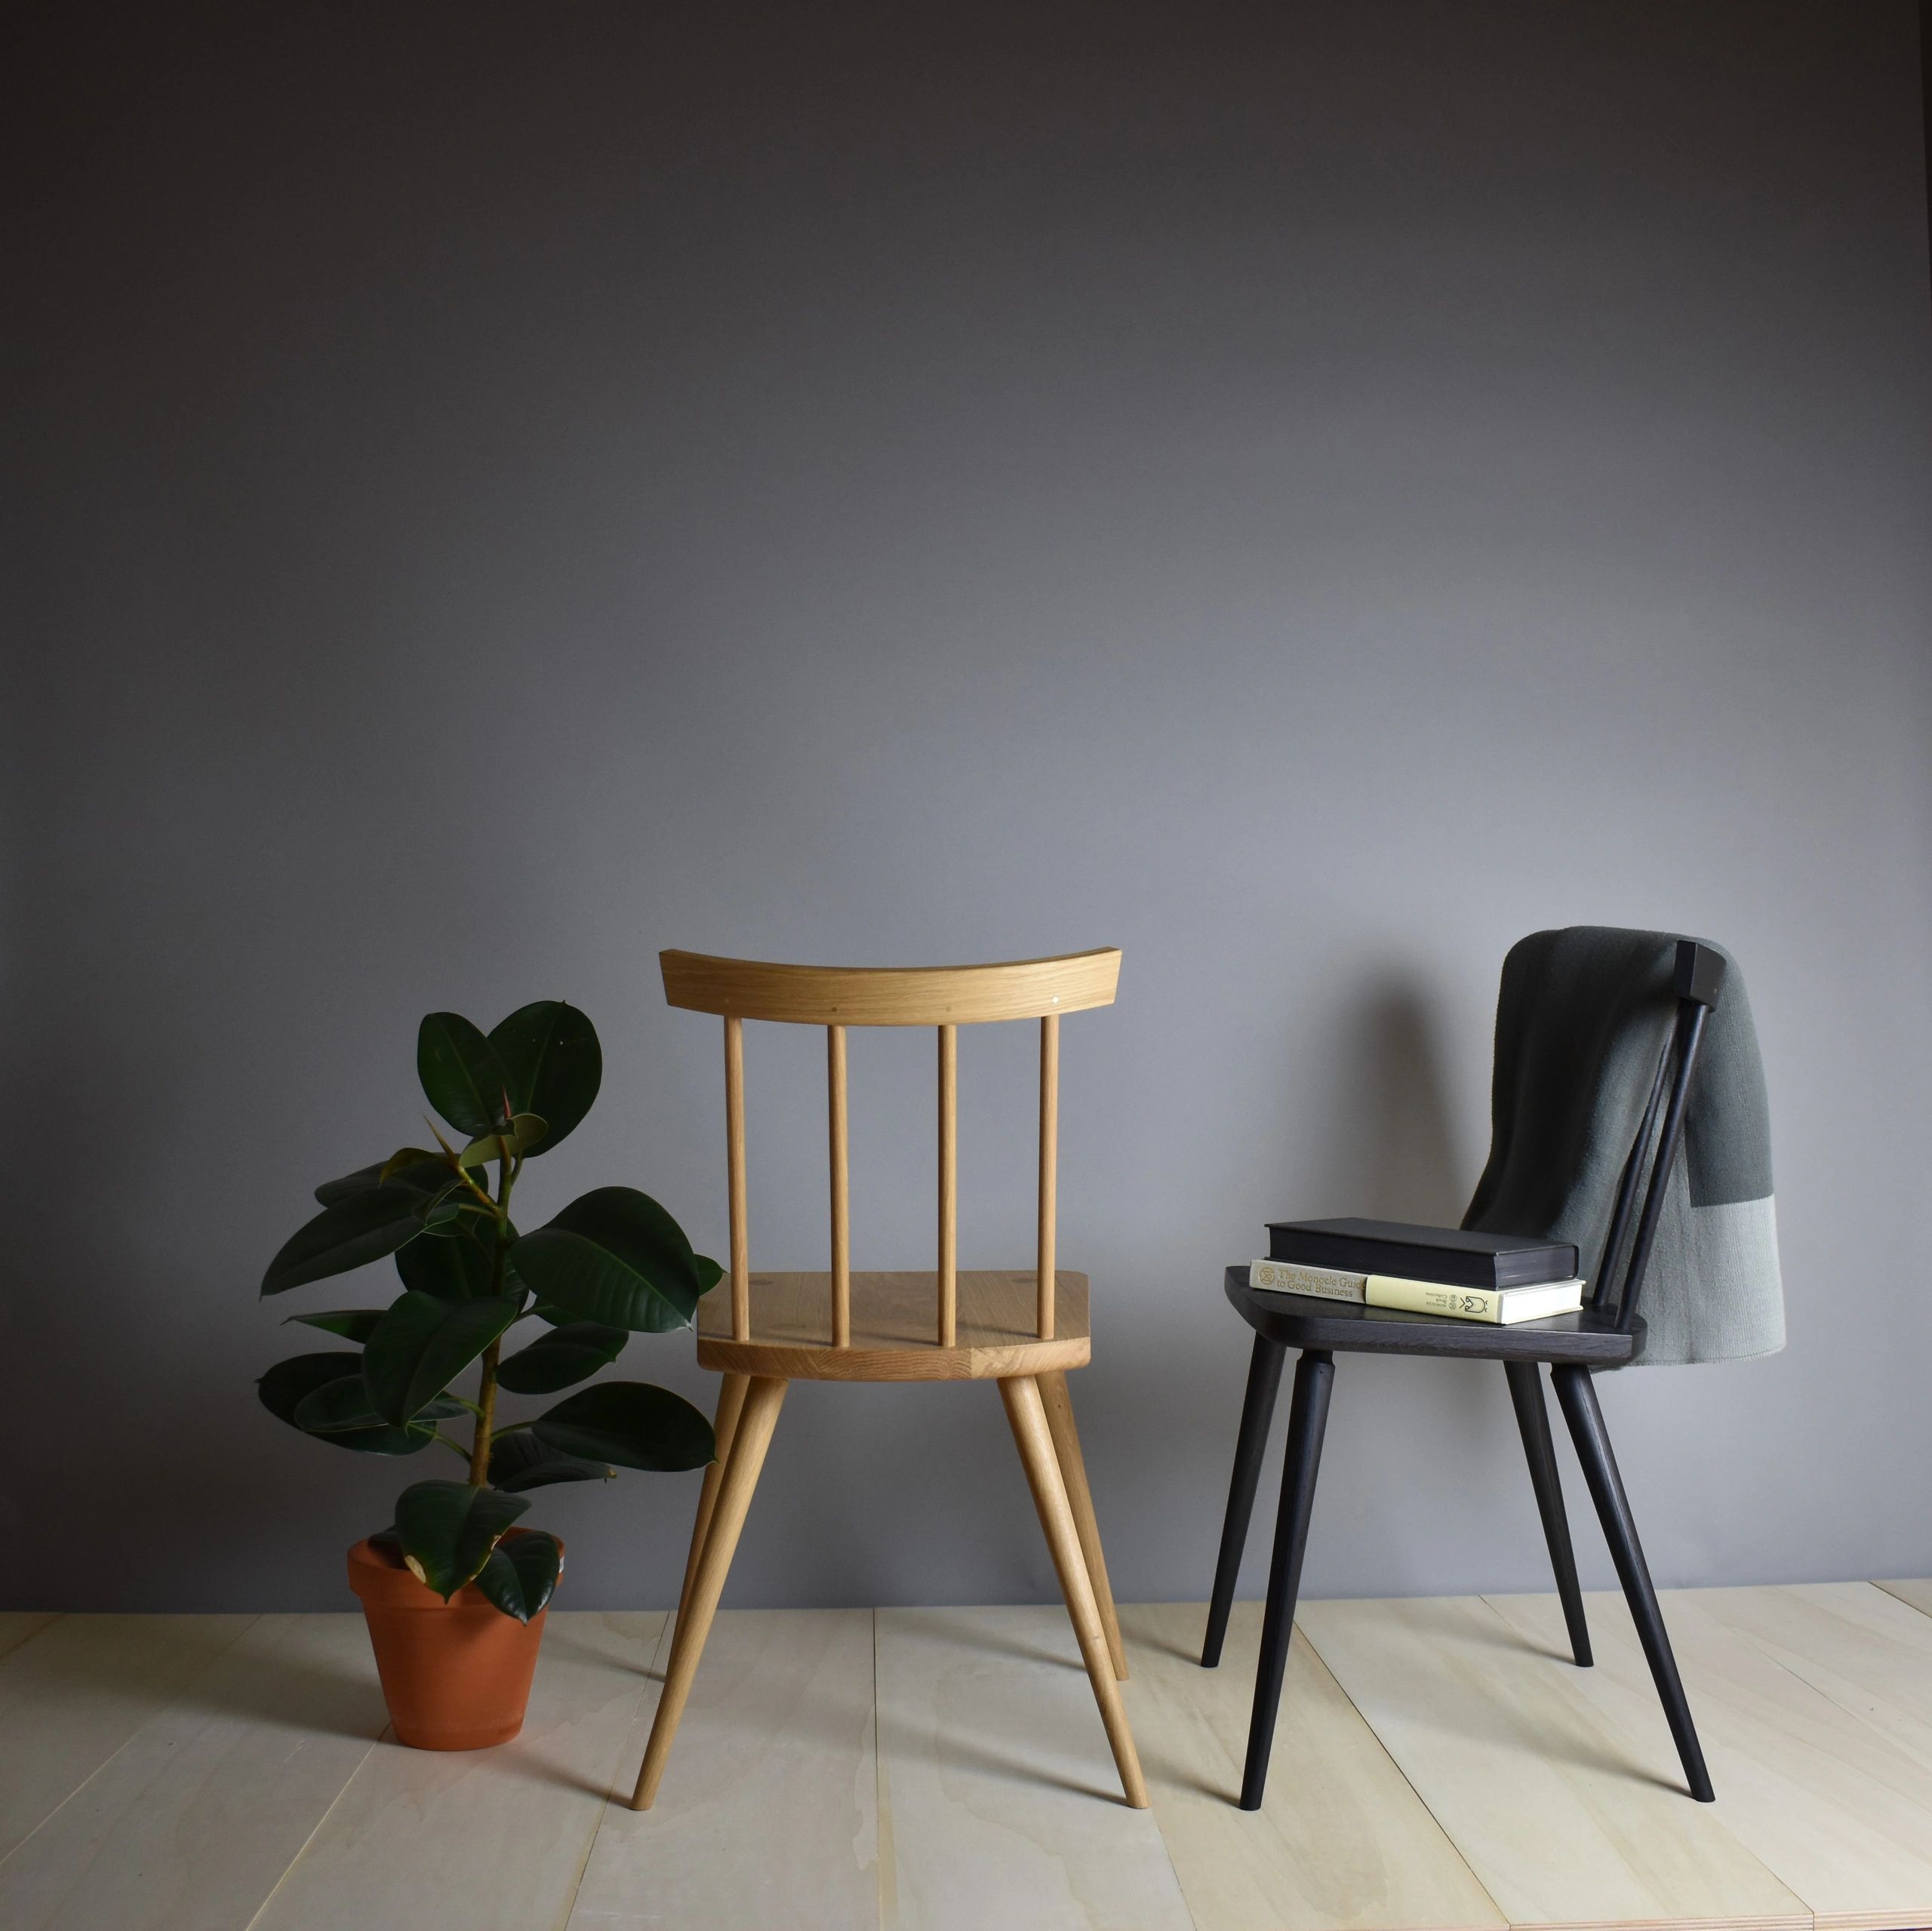 Honest dining chairs in Oak and ebonised Ash styled with books on design, a plant and a throw